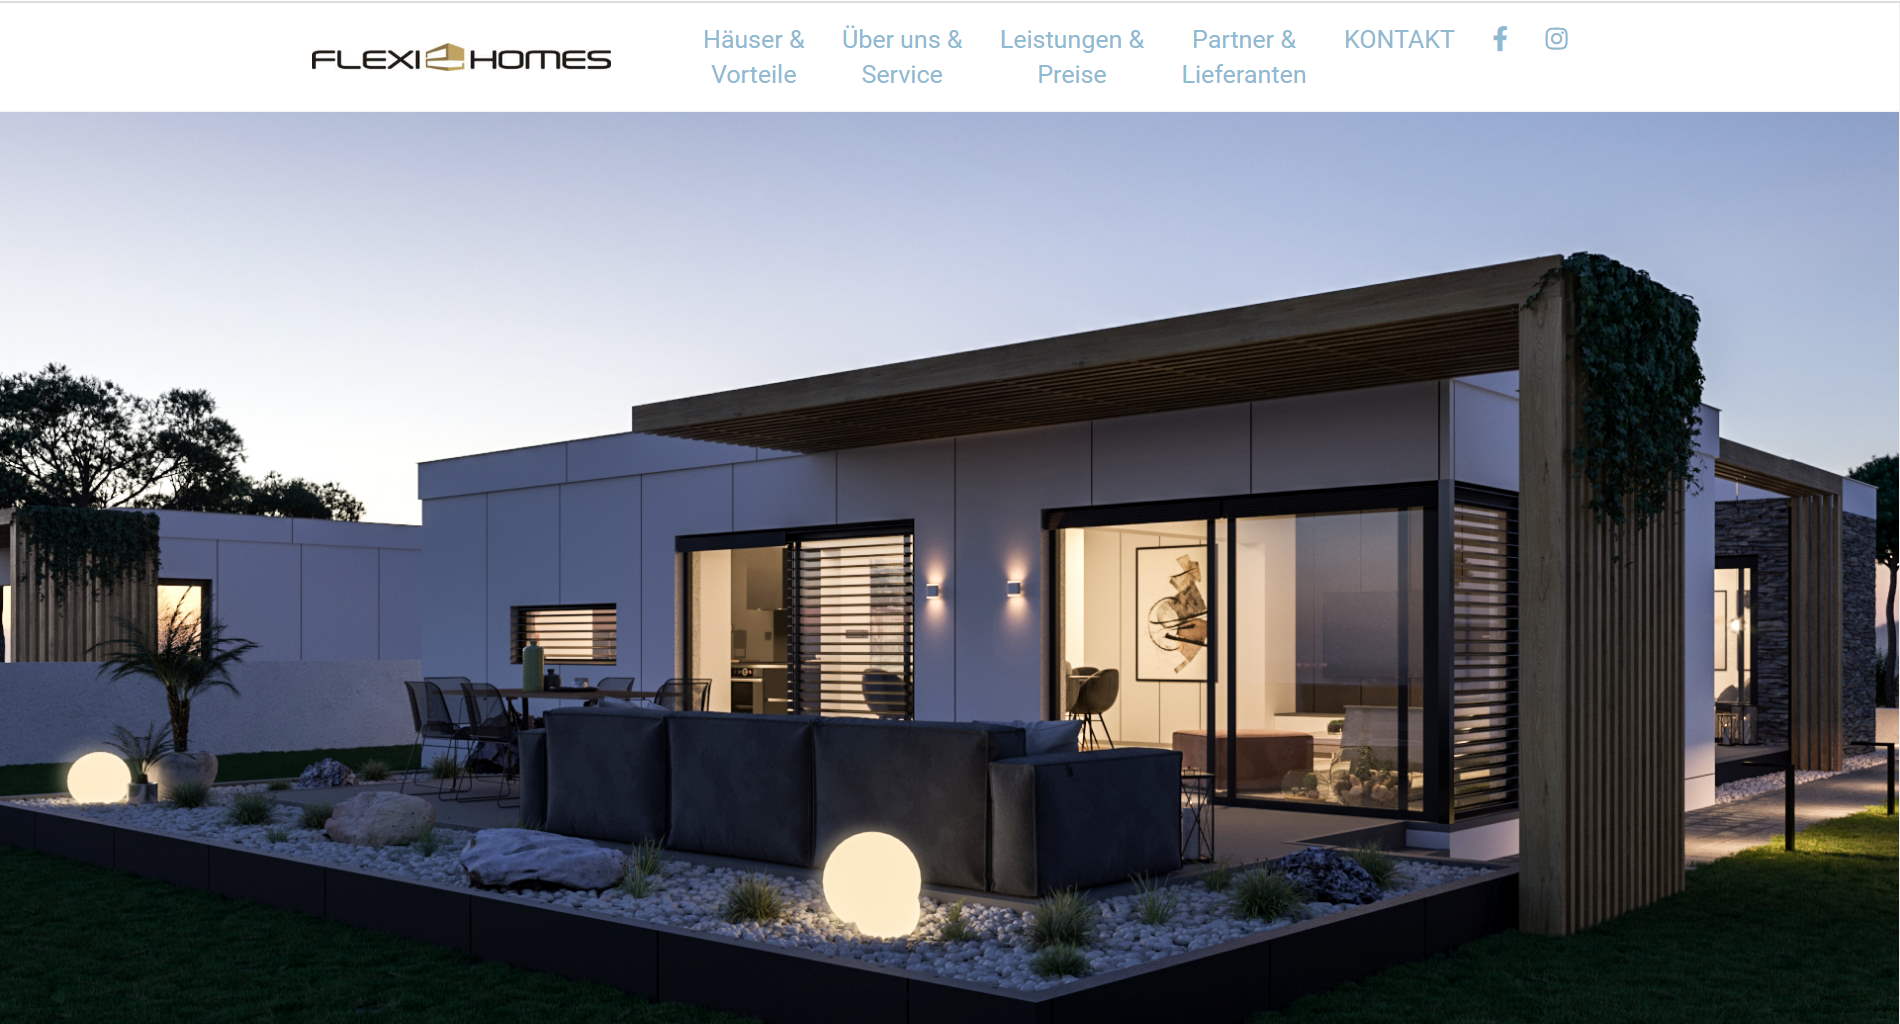 flexihomes.at